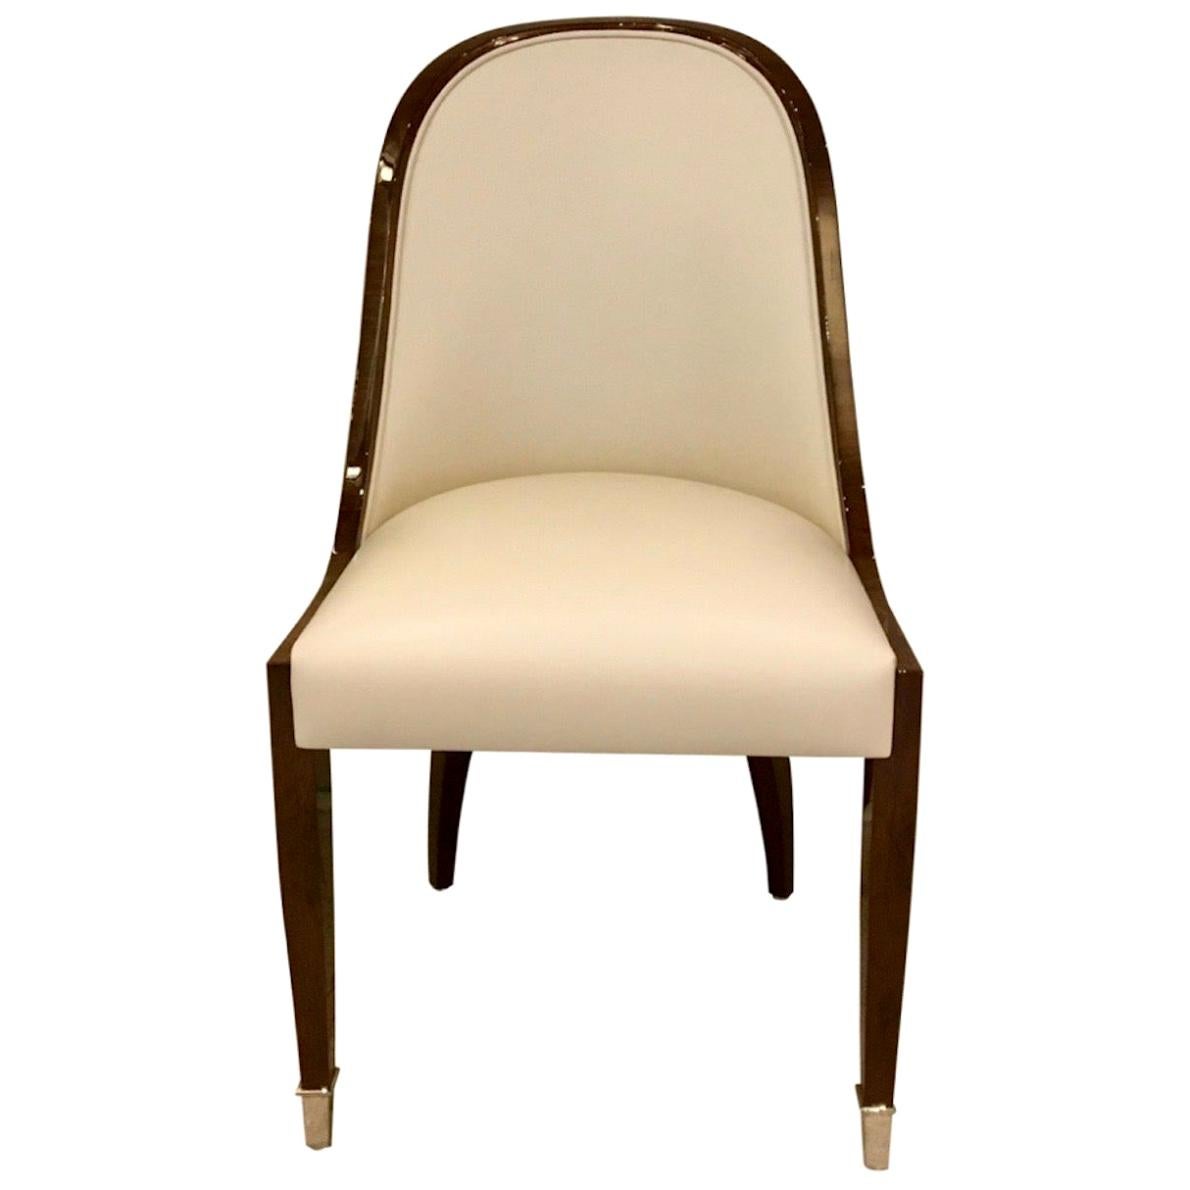 Chair with Wide Curved Backrest in Art Deco Style with Leather and Wood